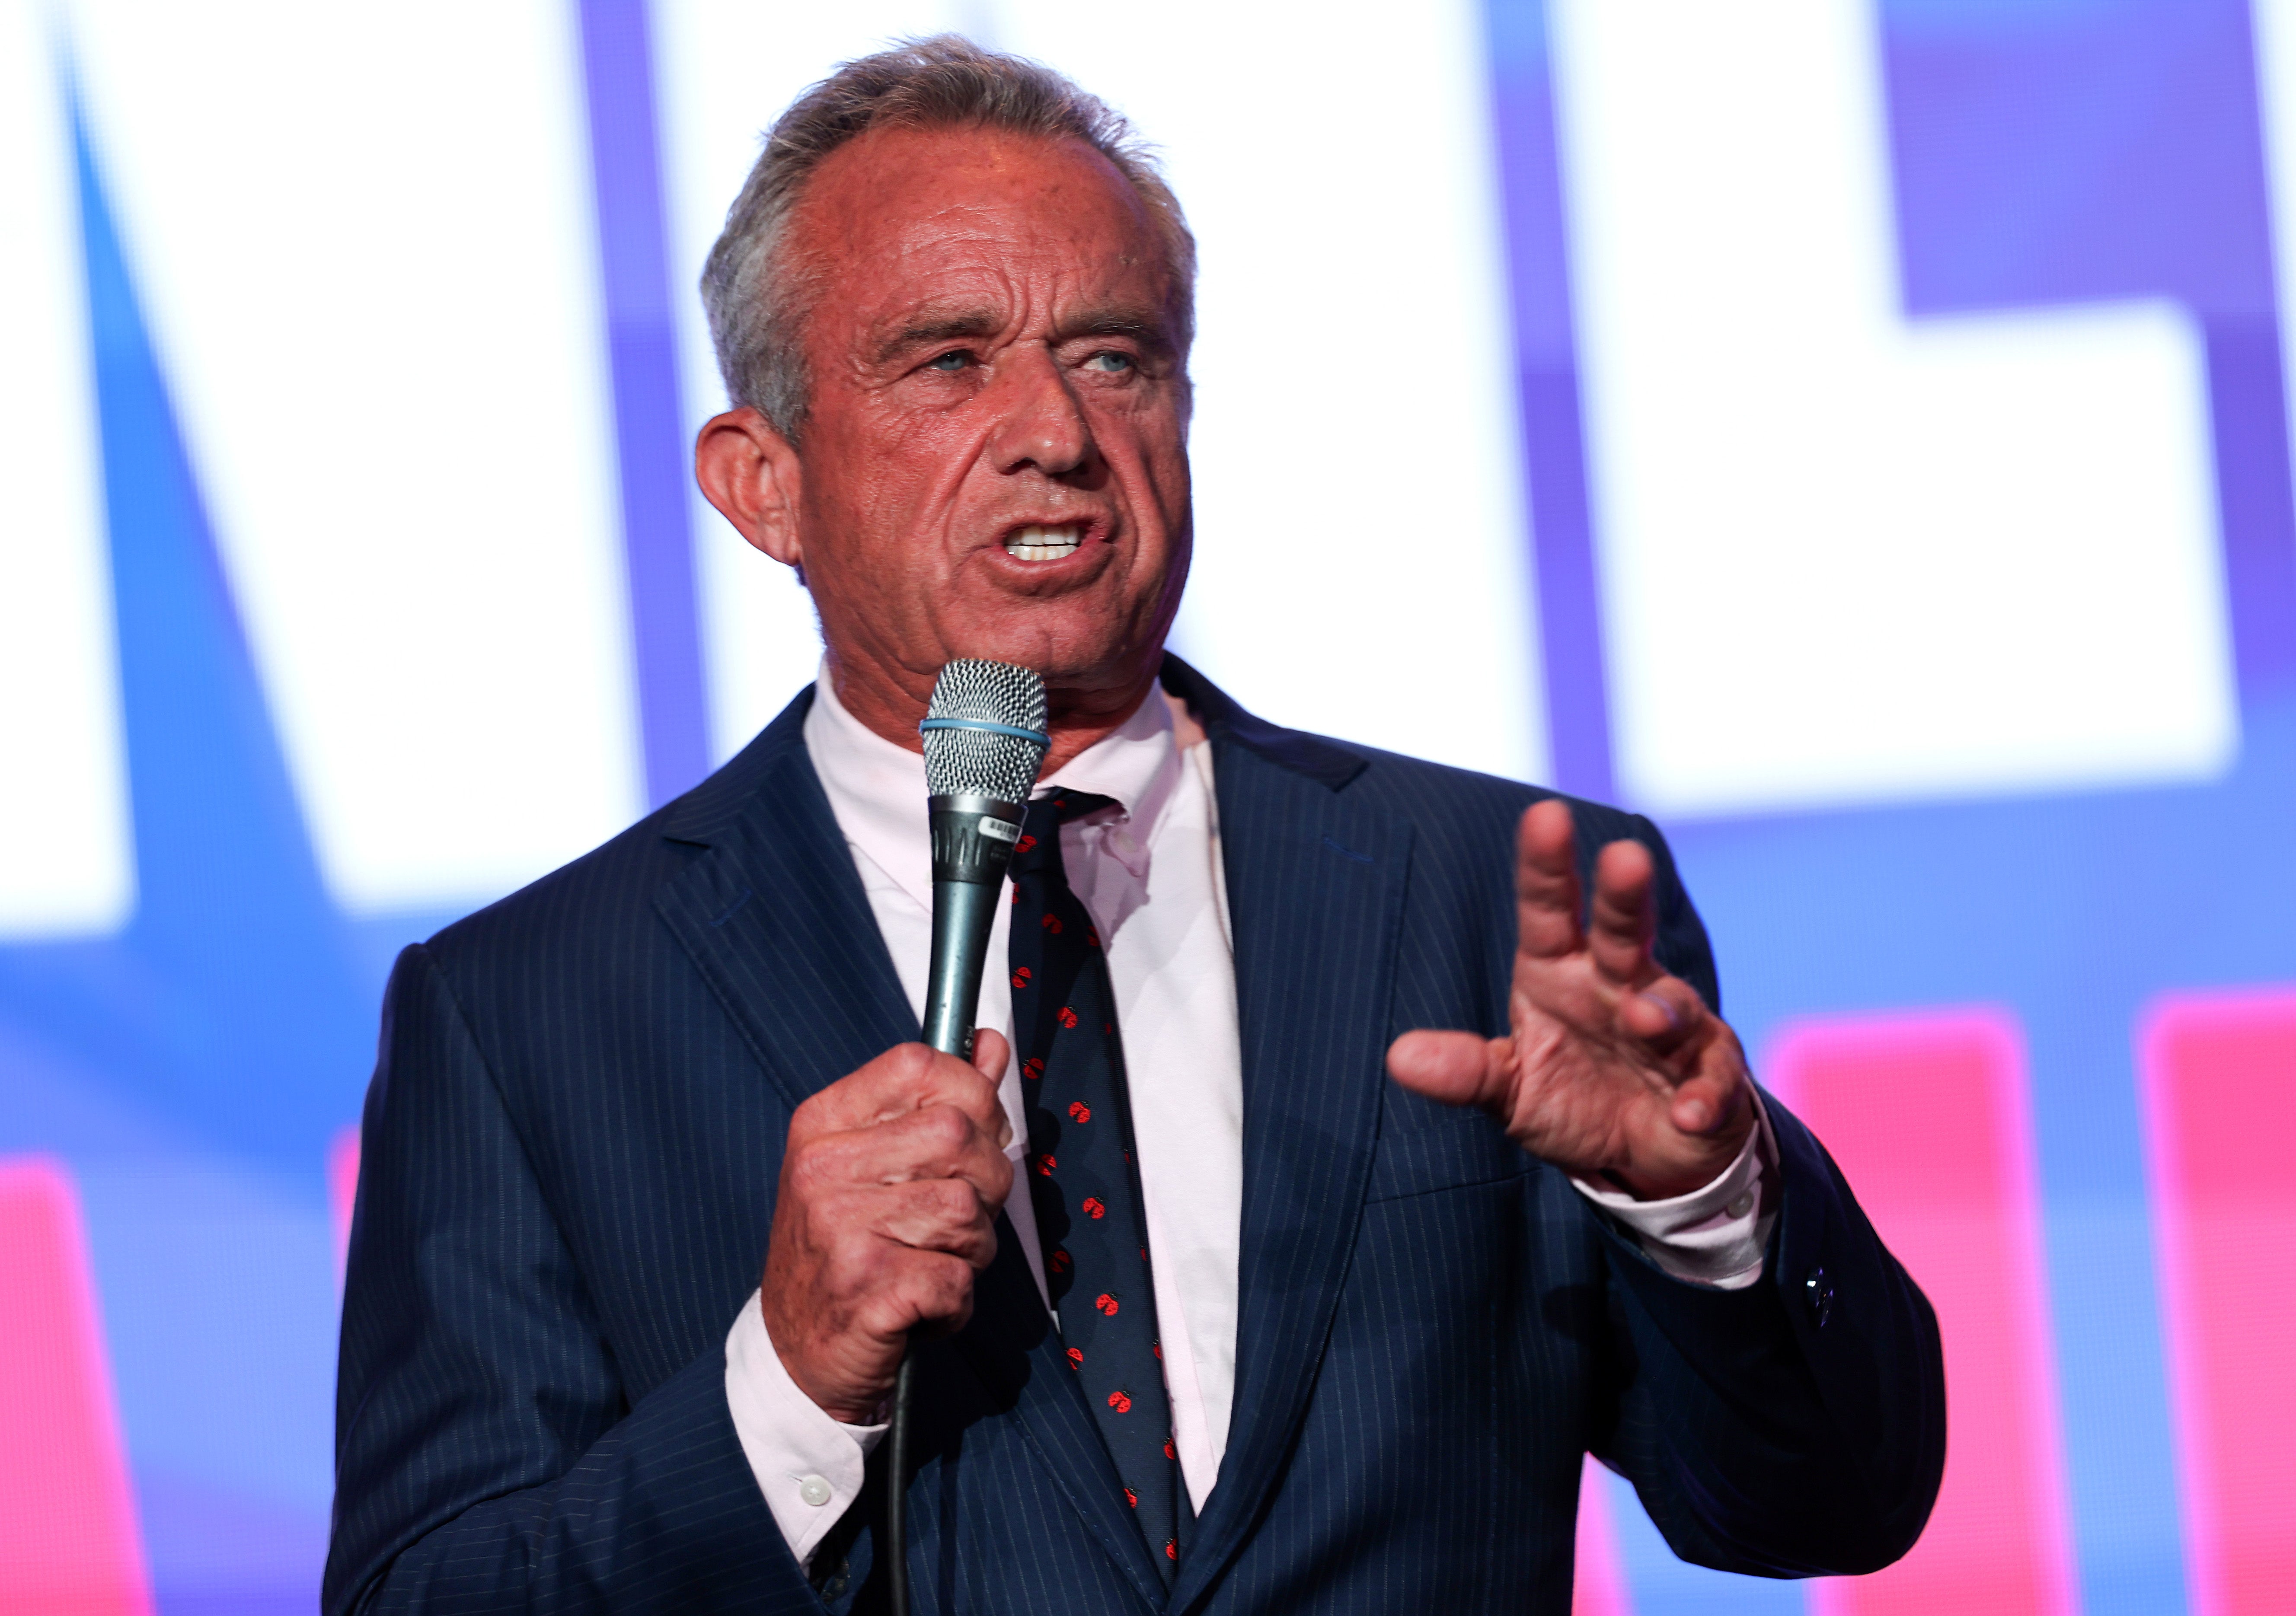 Robert F Kennedy Jr speaks at the Libertarian National Convention on 24 May 2024 in Washington, DC